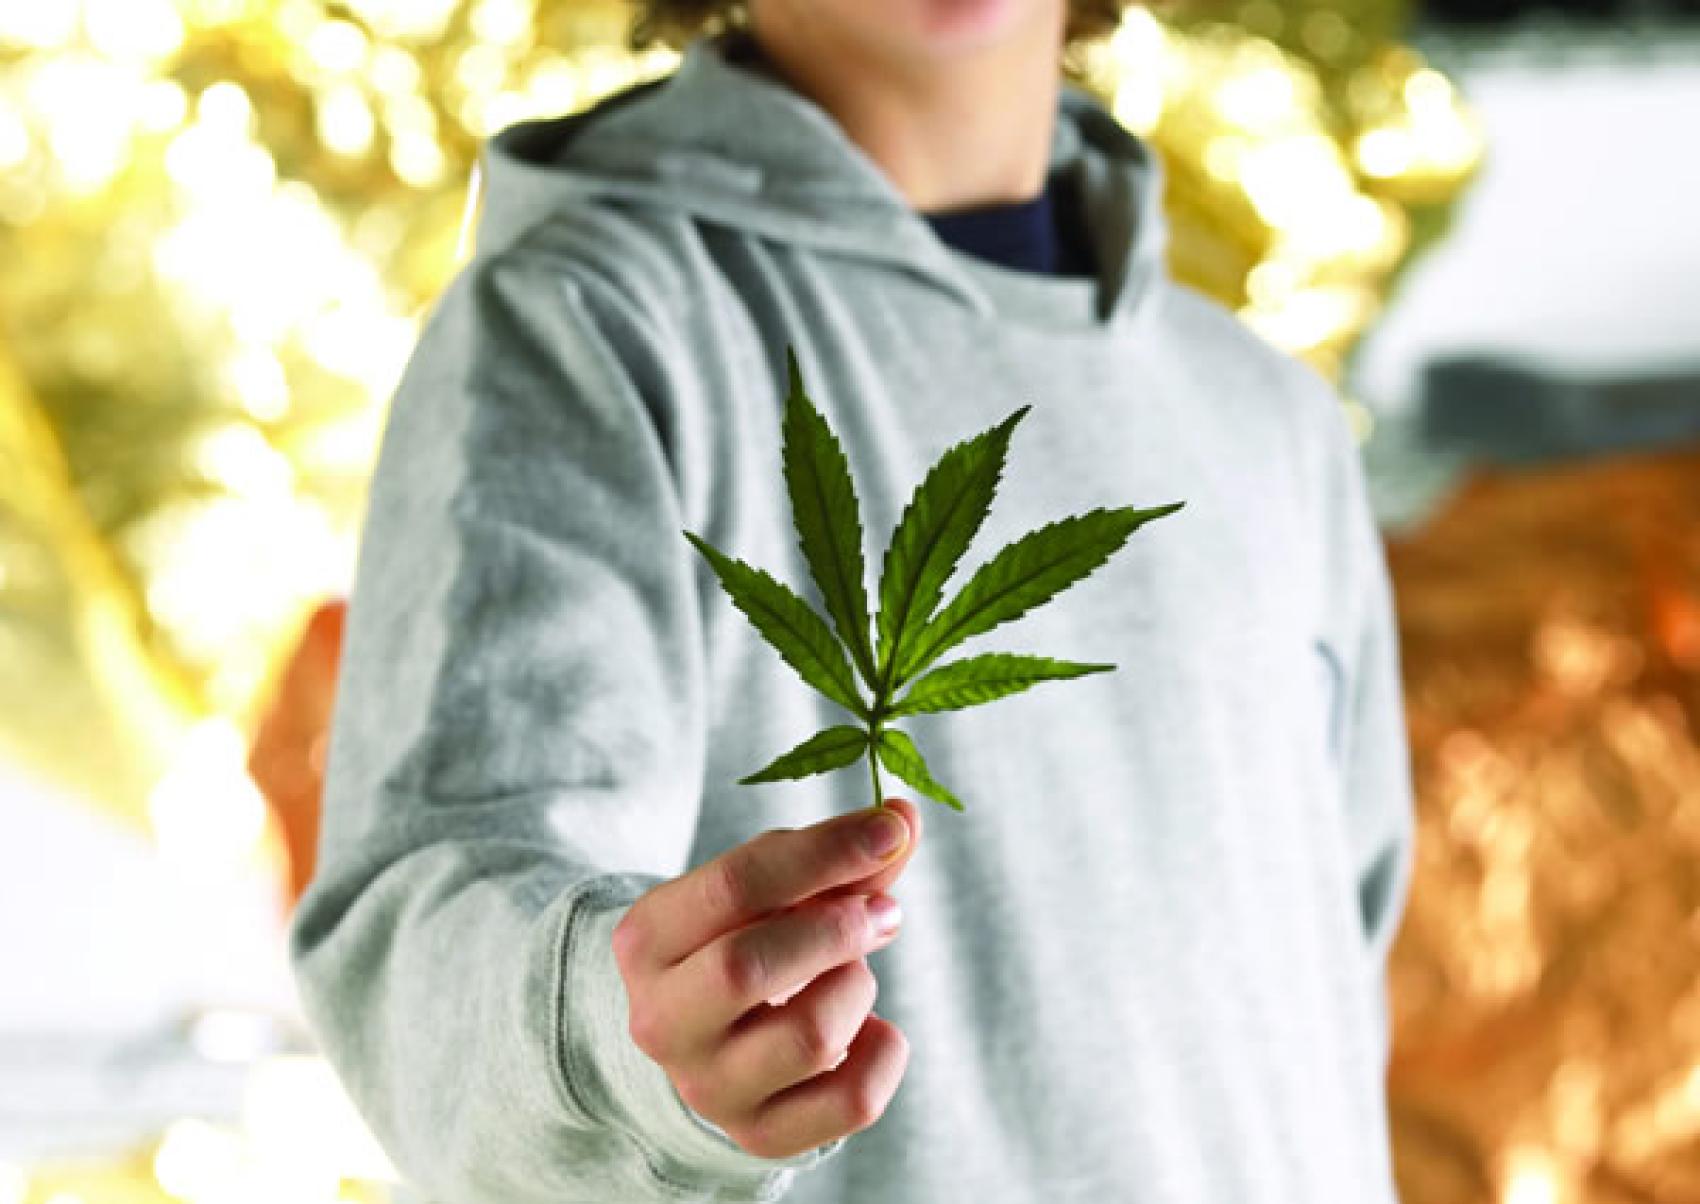 Marijuana Becomes Legal: Young People Who Use It?